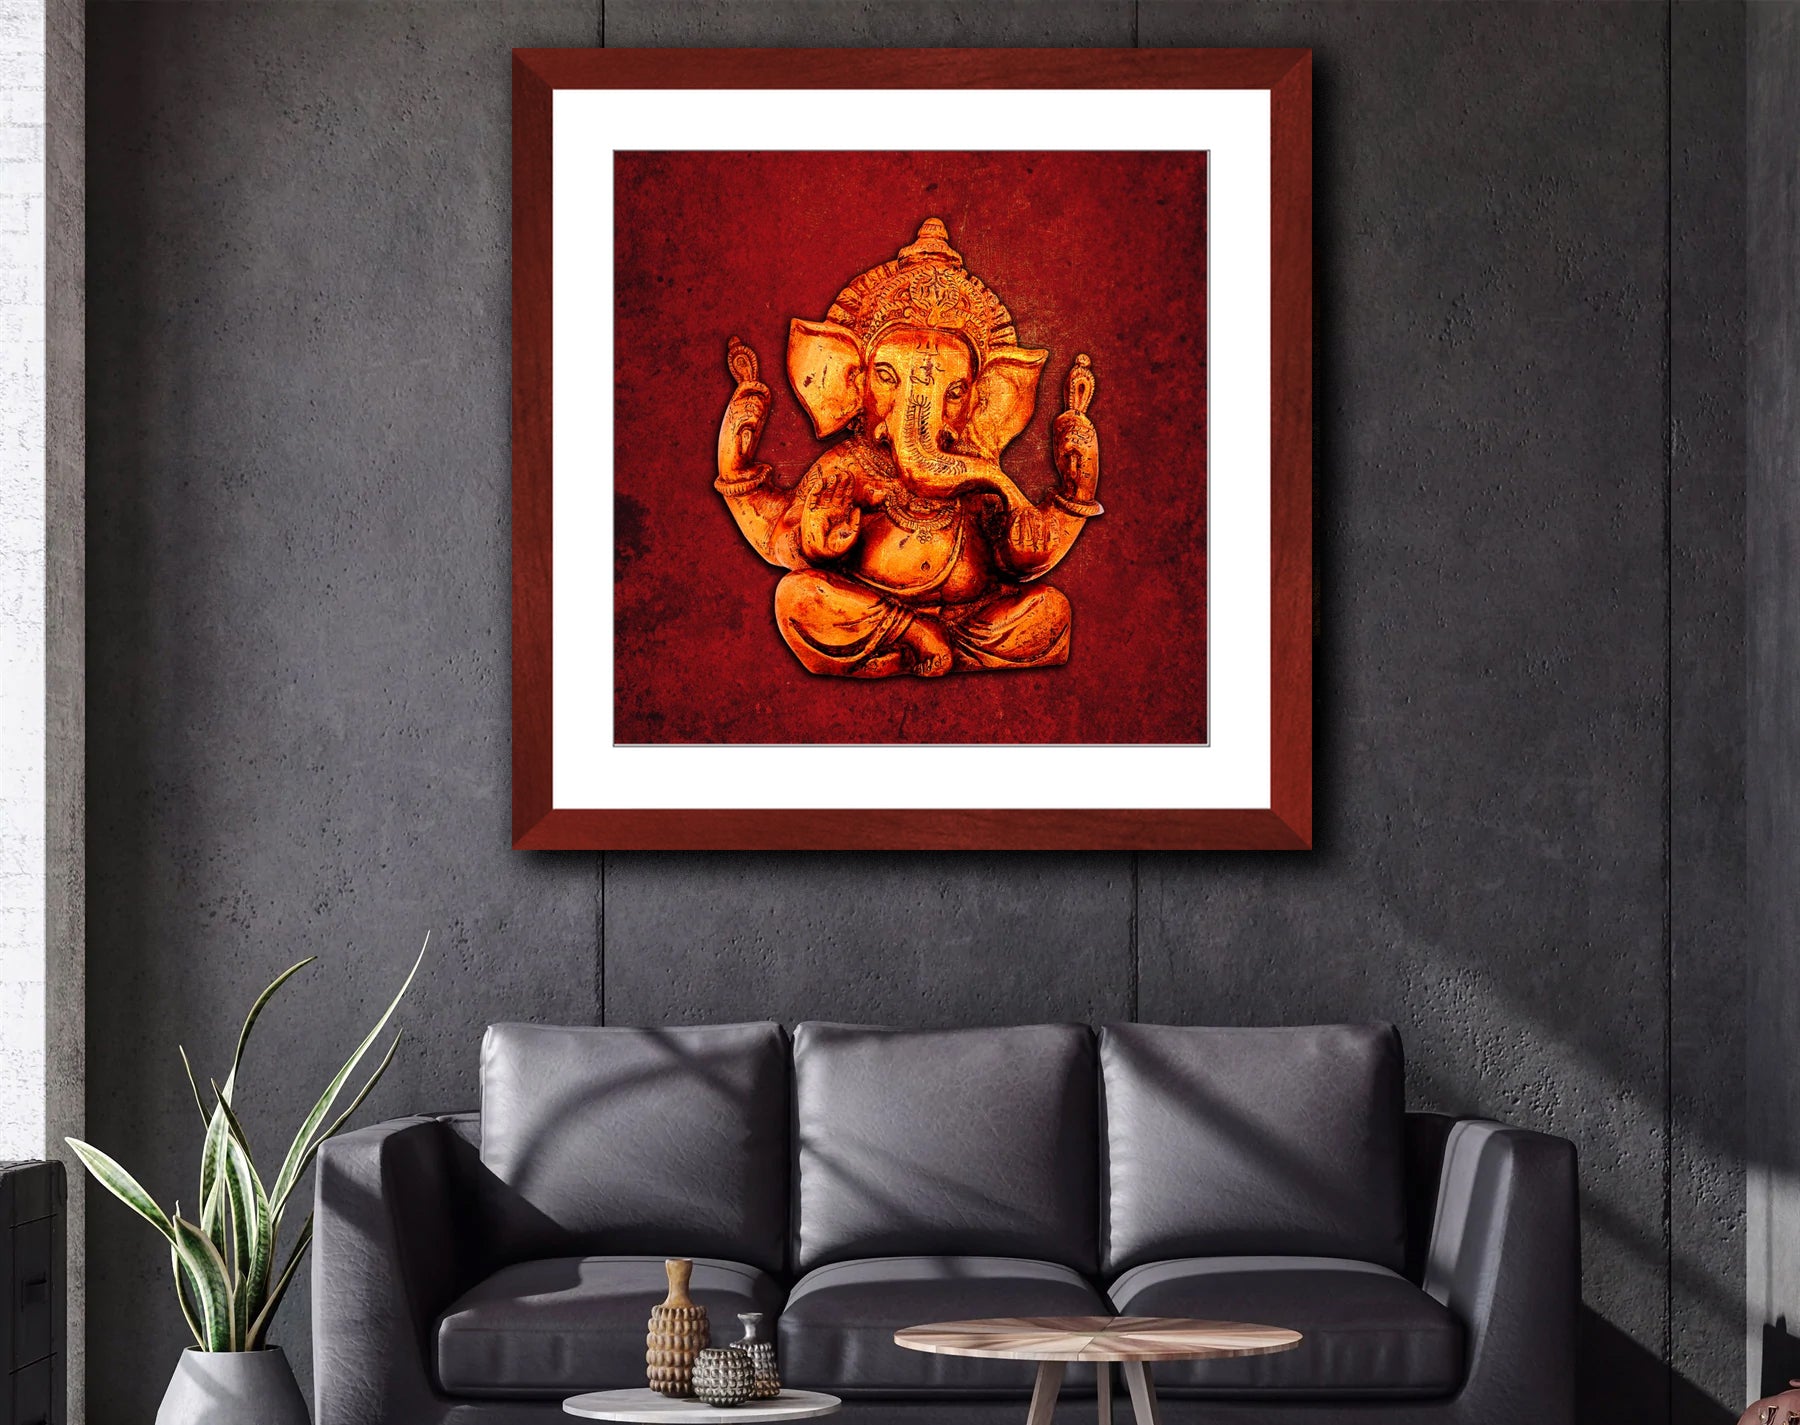 Ganesha on a Lava Red Background Print in Cherry Color Wood Frame